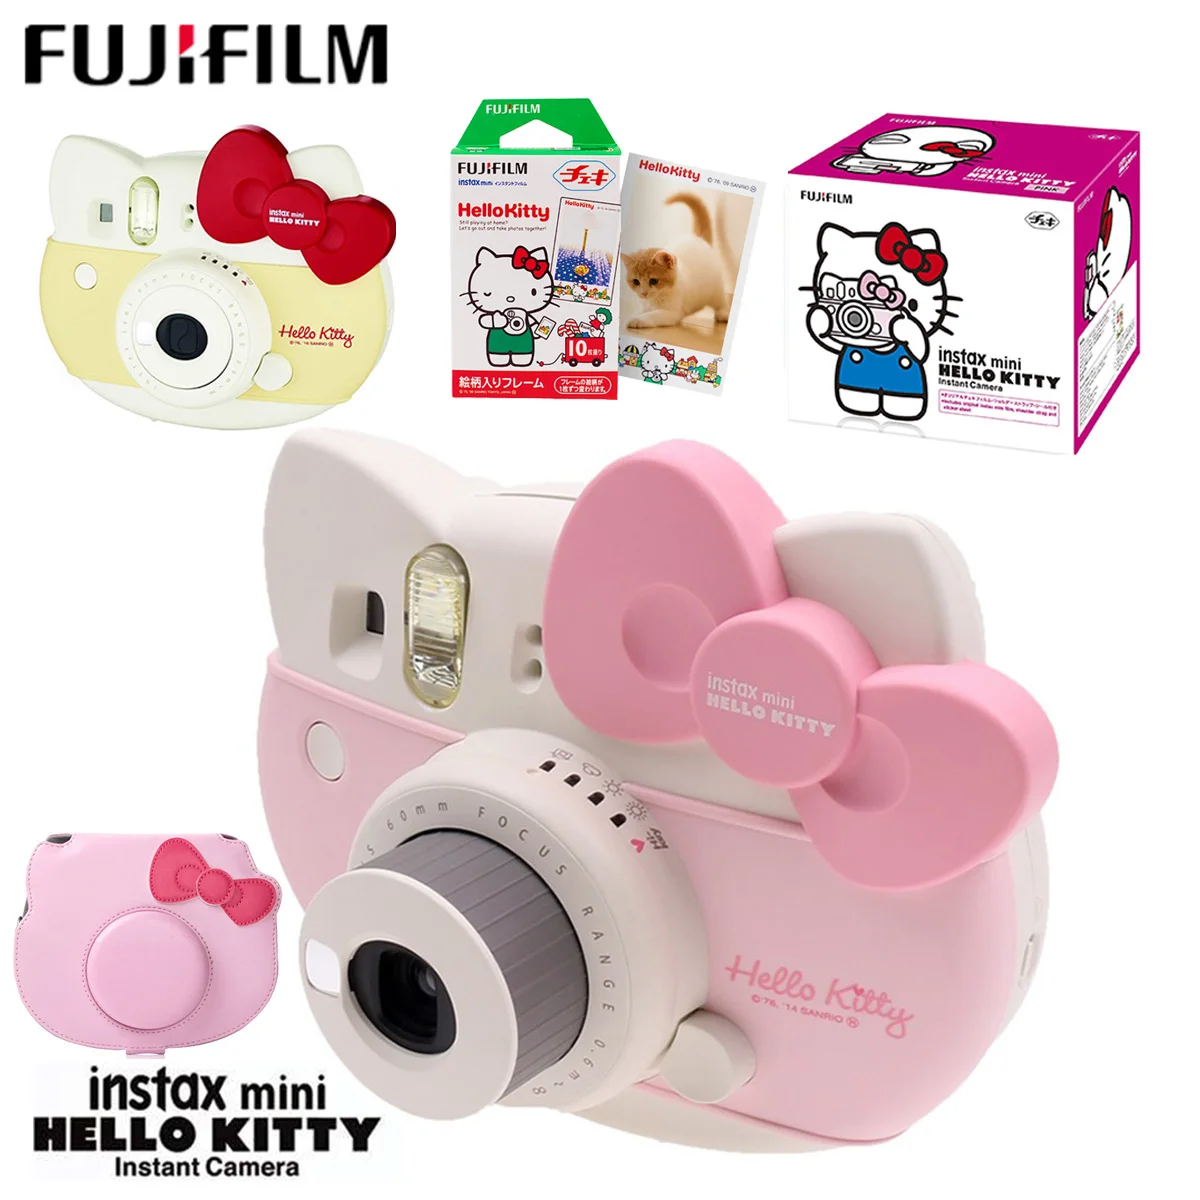 Fujifilm Instax Mini 8 Kitty Limited Edition Instant Camera with 10 Sheets...